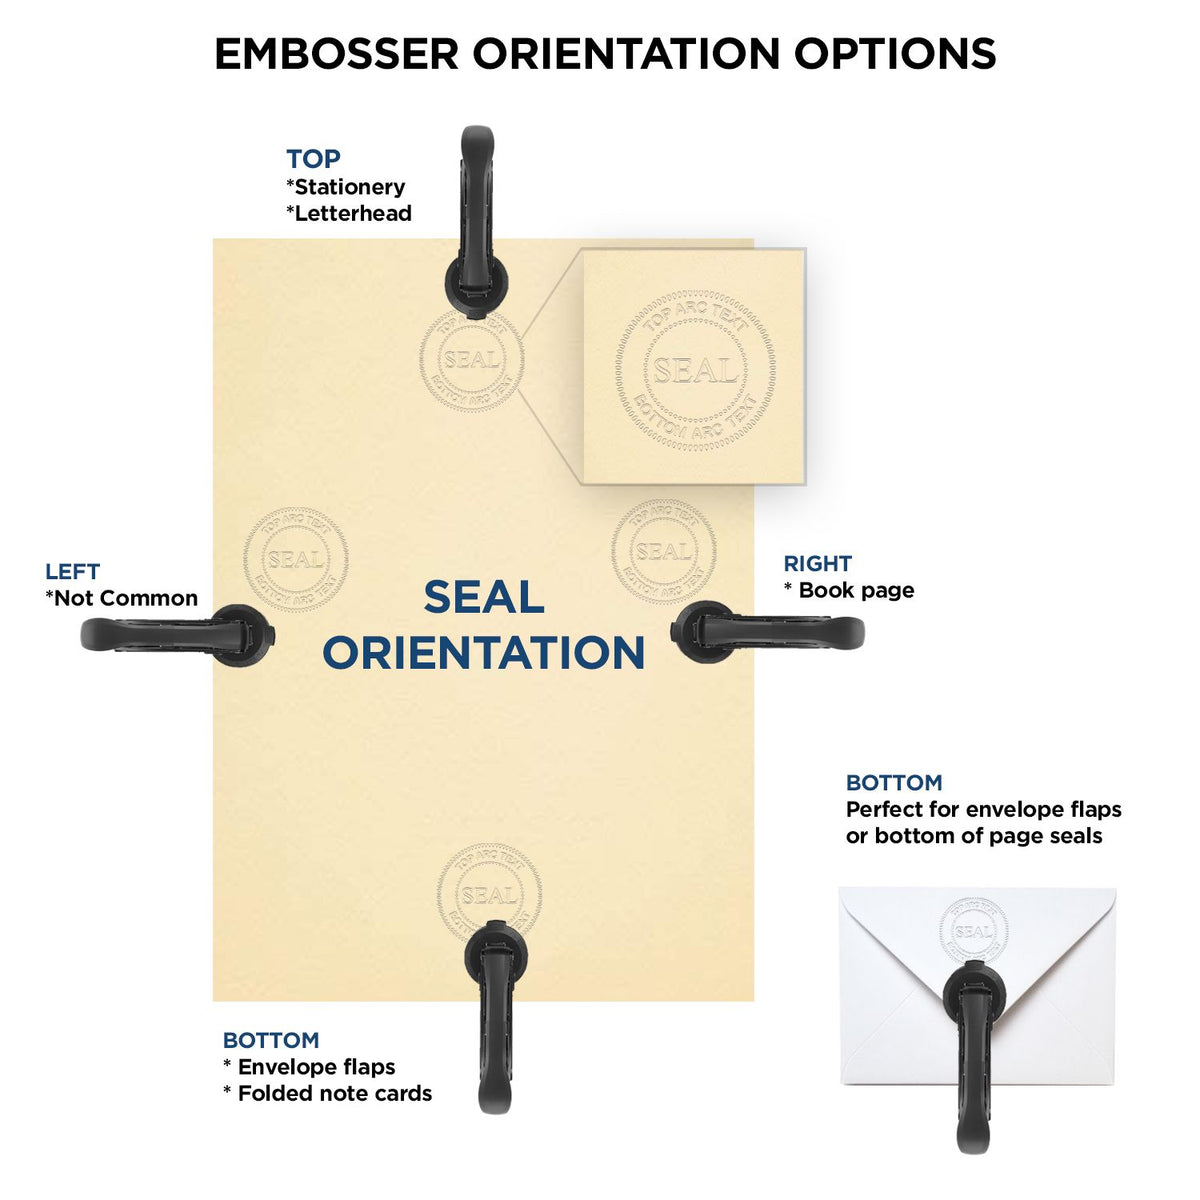 An infographic for the State of Massachusetts Extended Long Reach Engineer Seal showing embosser orientation, this is showing examples of a top, bottom, right and left insert.